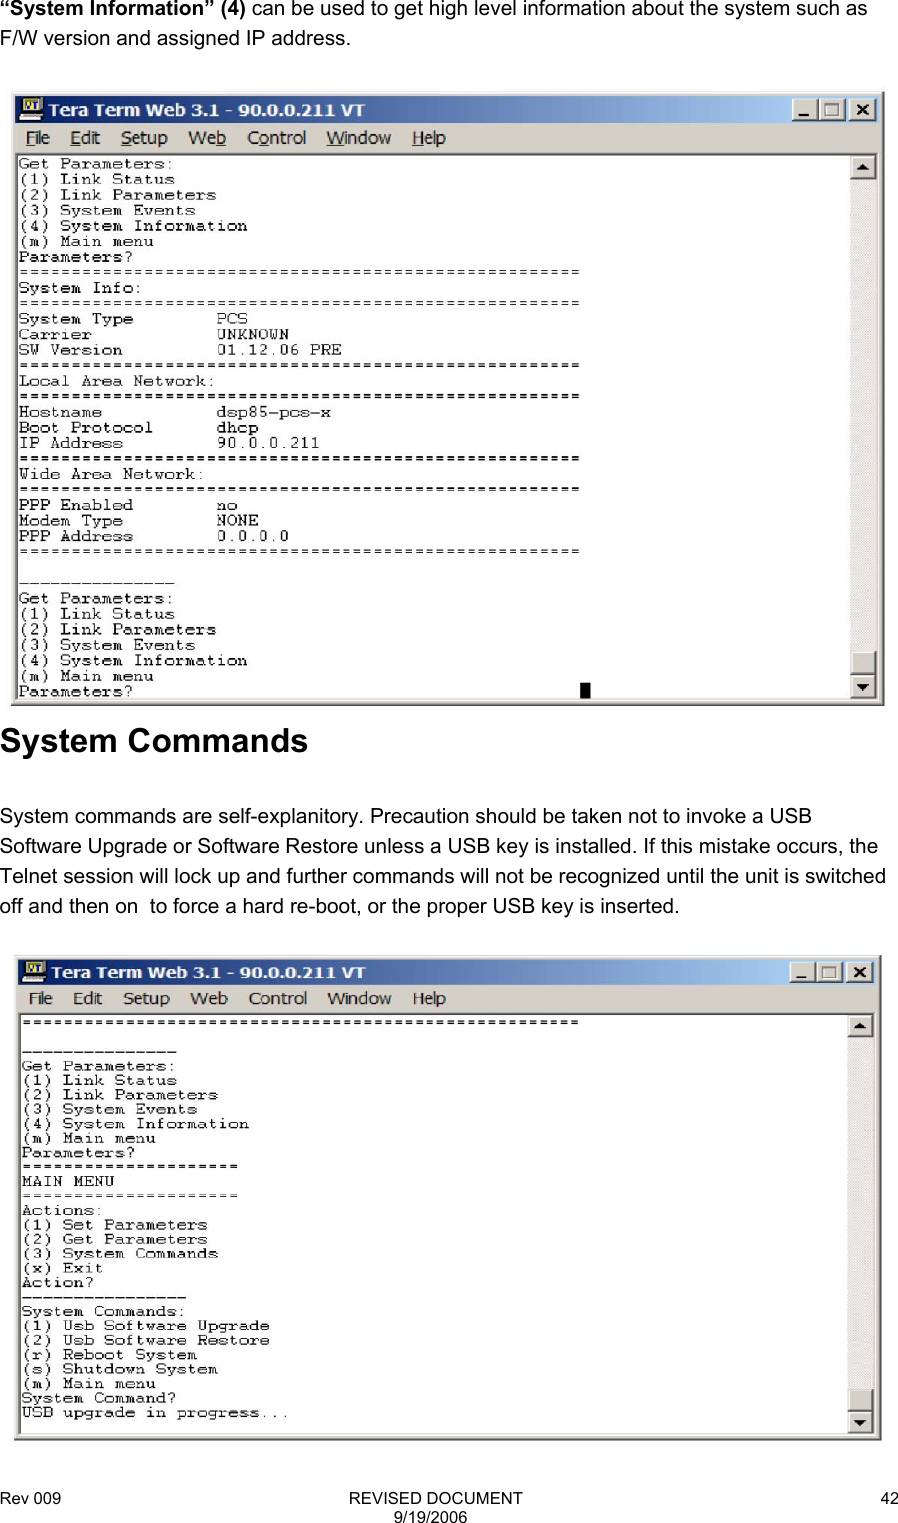 Rev 009                                                              REVISED DOCUMENT 9/19/2006 42“System Information” (4) can be used to get high level information about the system such as F/W version and assigned IP address.   System Commands  System commands are self-explanitory. Precaution should be taken not to invoke a USB Software Upgrade or Software Restore unless a USB key is installed. If this mistake occurs, the Telnet session will lock up and further commands will not be recognized until the unit is switched off and then on  to force a hard re-boot, or the proper USB key is inserted.   